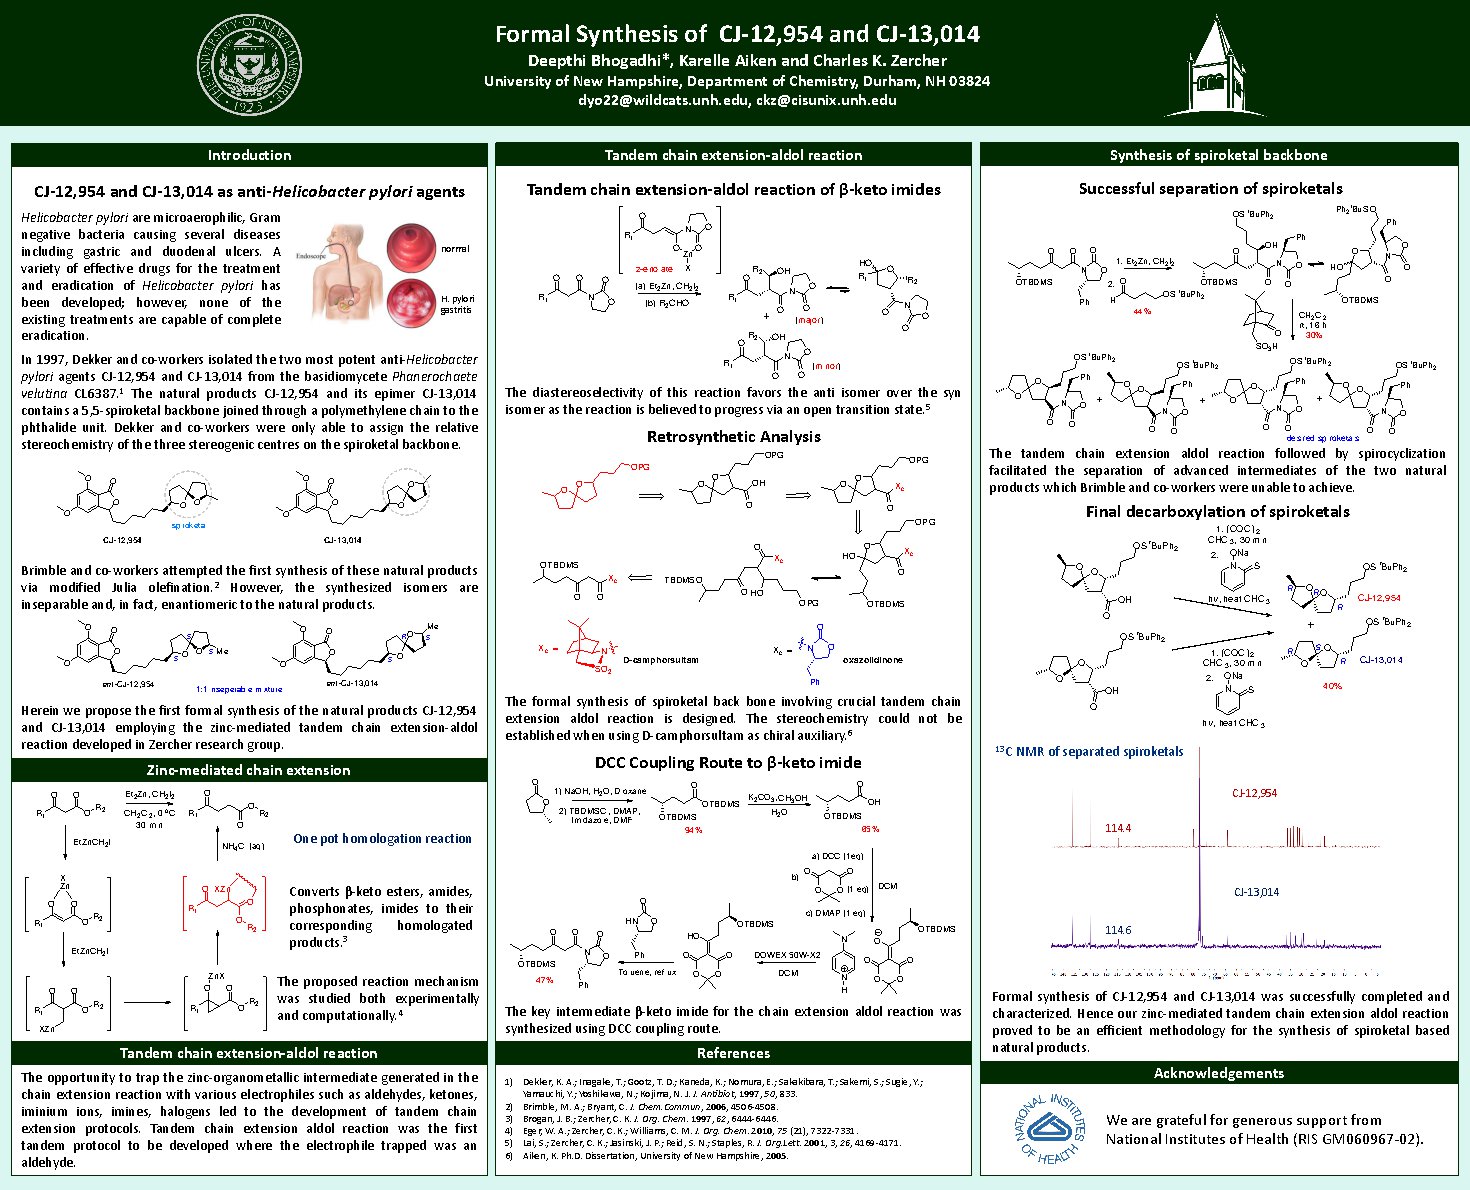 Formal Synthesis Of Cj-12,954 And Cj-13,014 by Deepthi